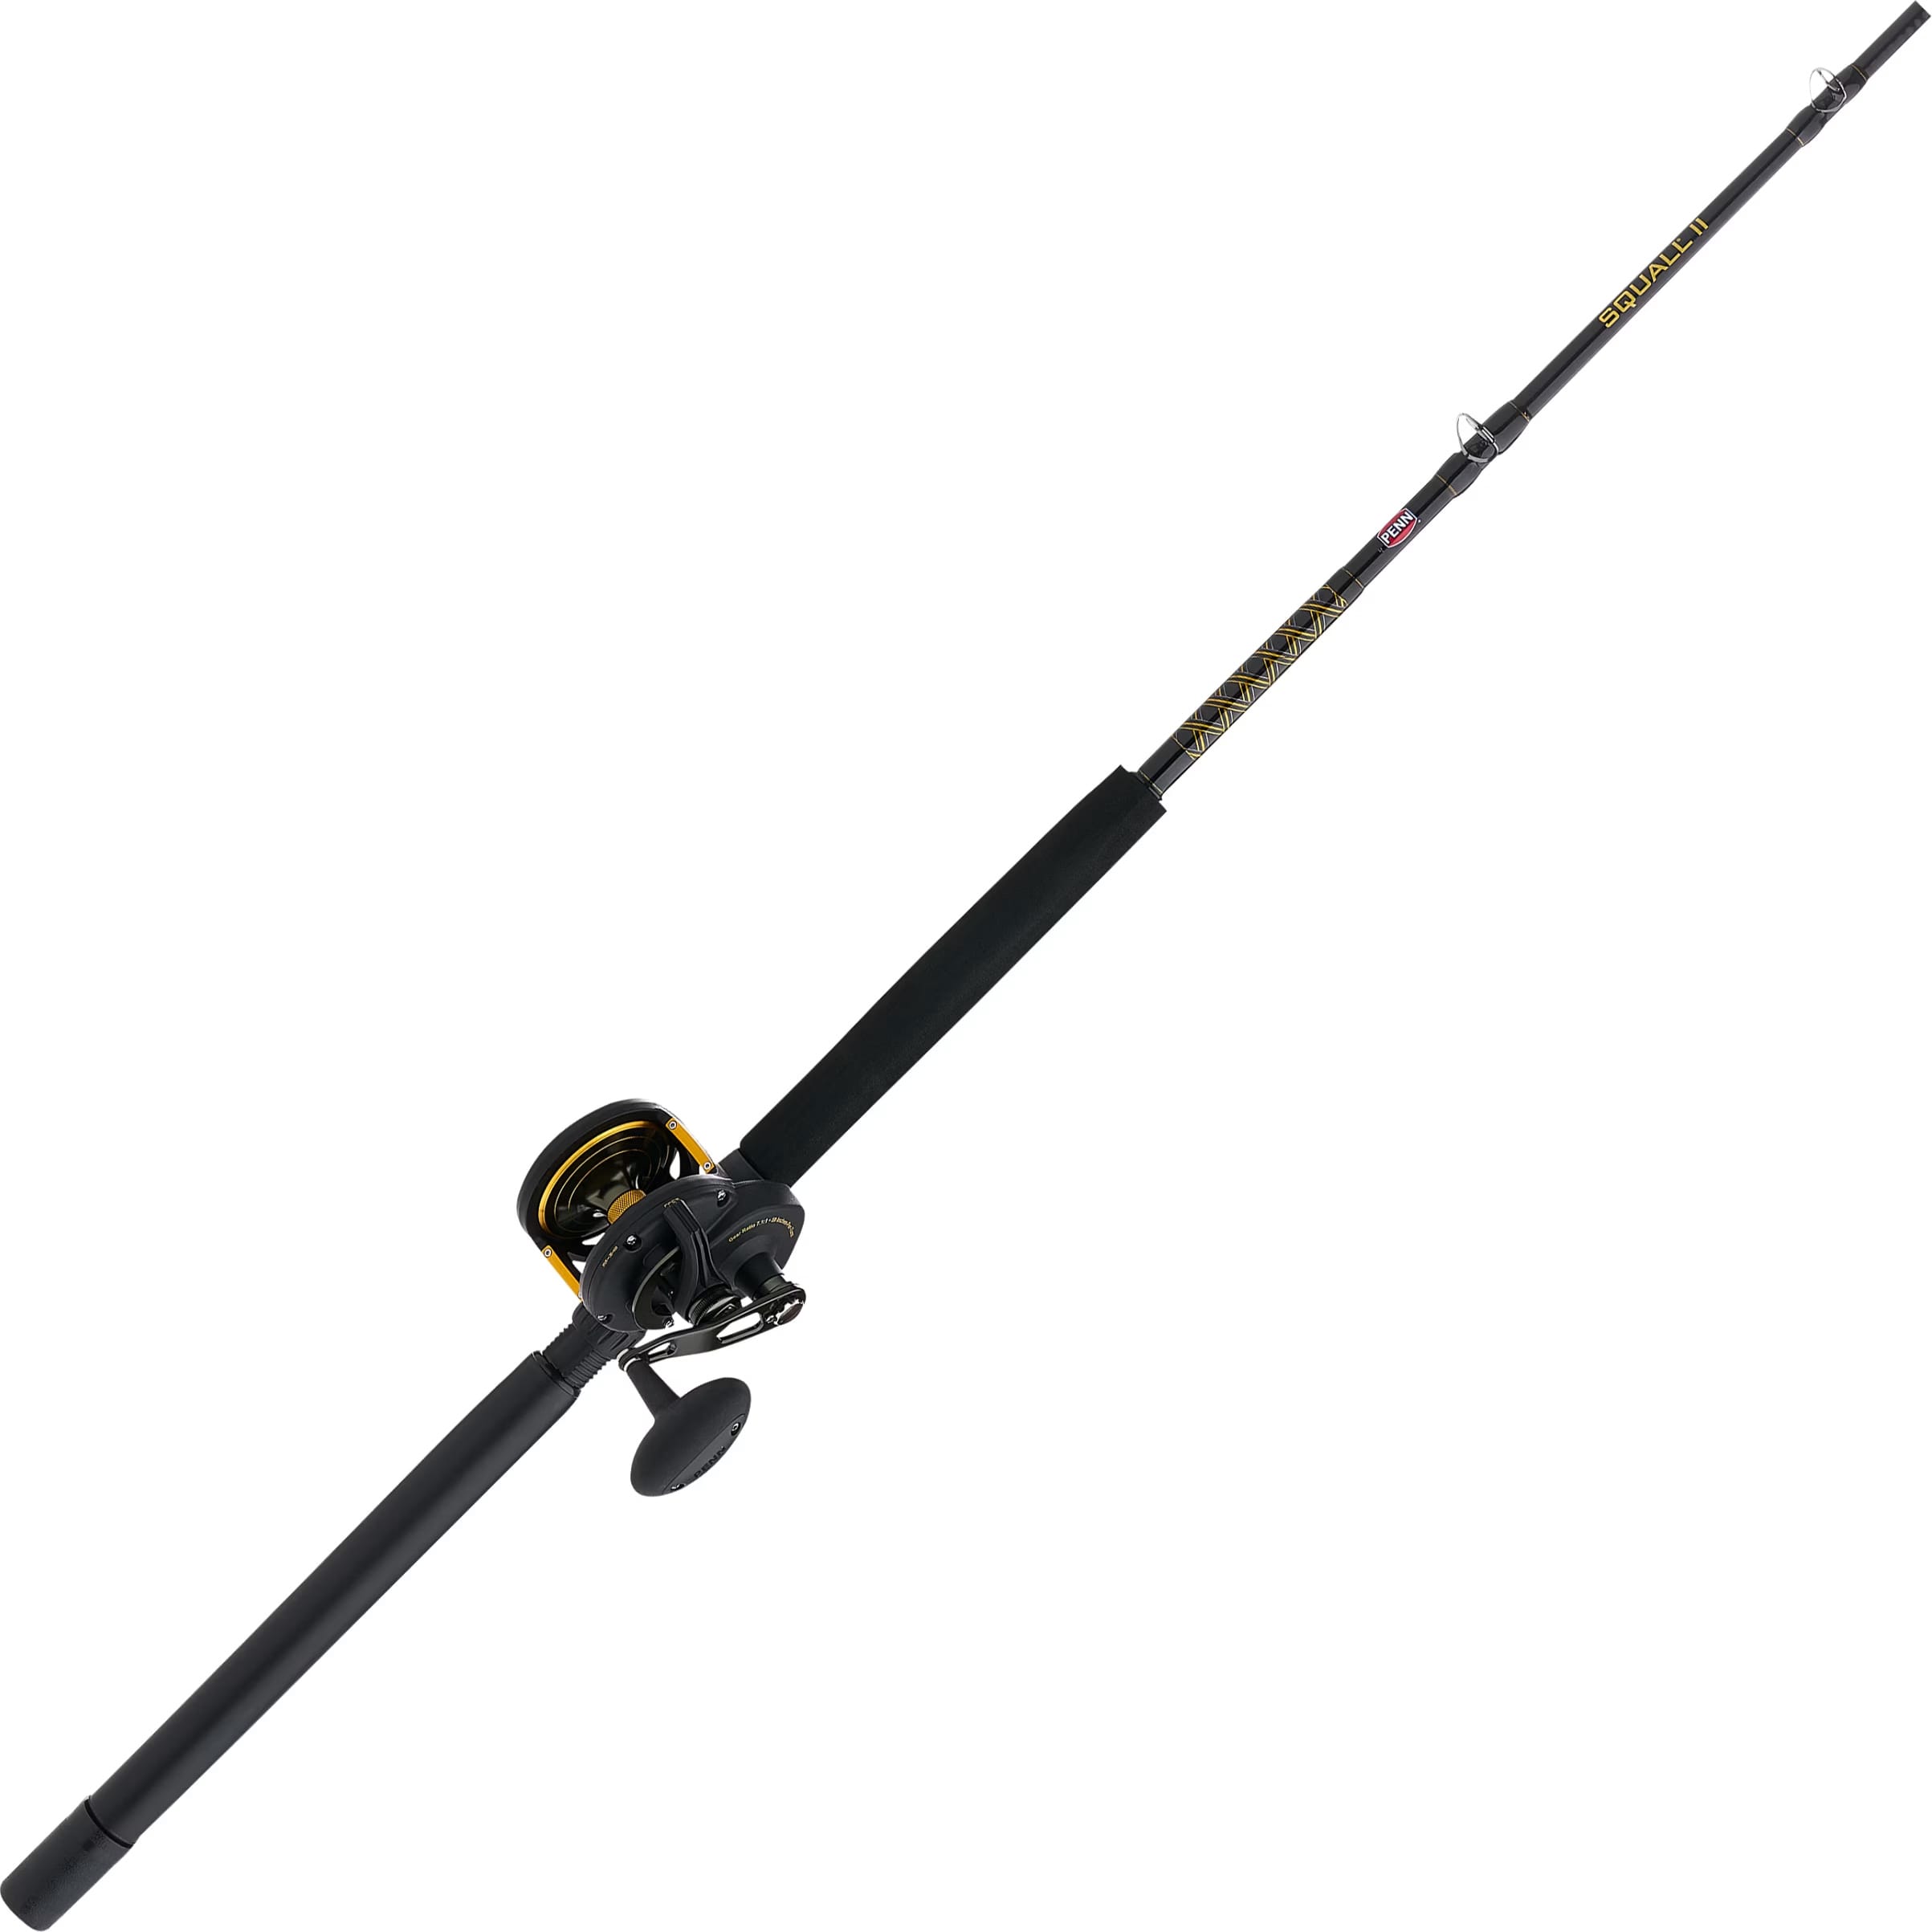 PENN Squall II Lever Drag Conventional Combo - Cabelas - PENN 